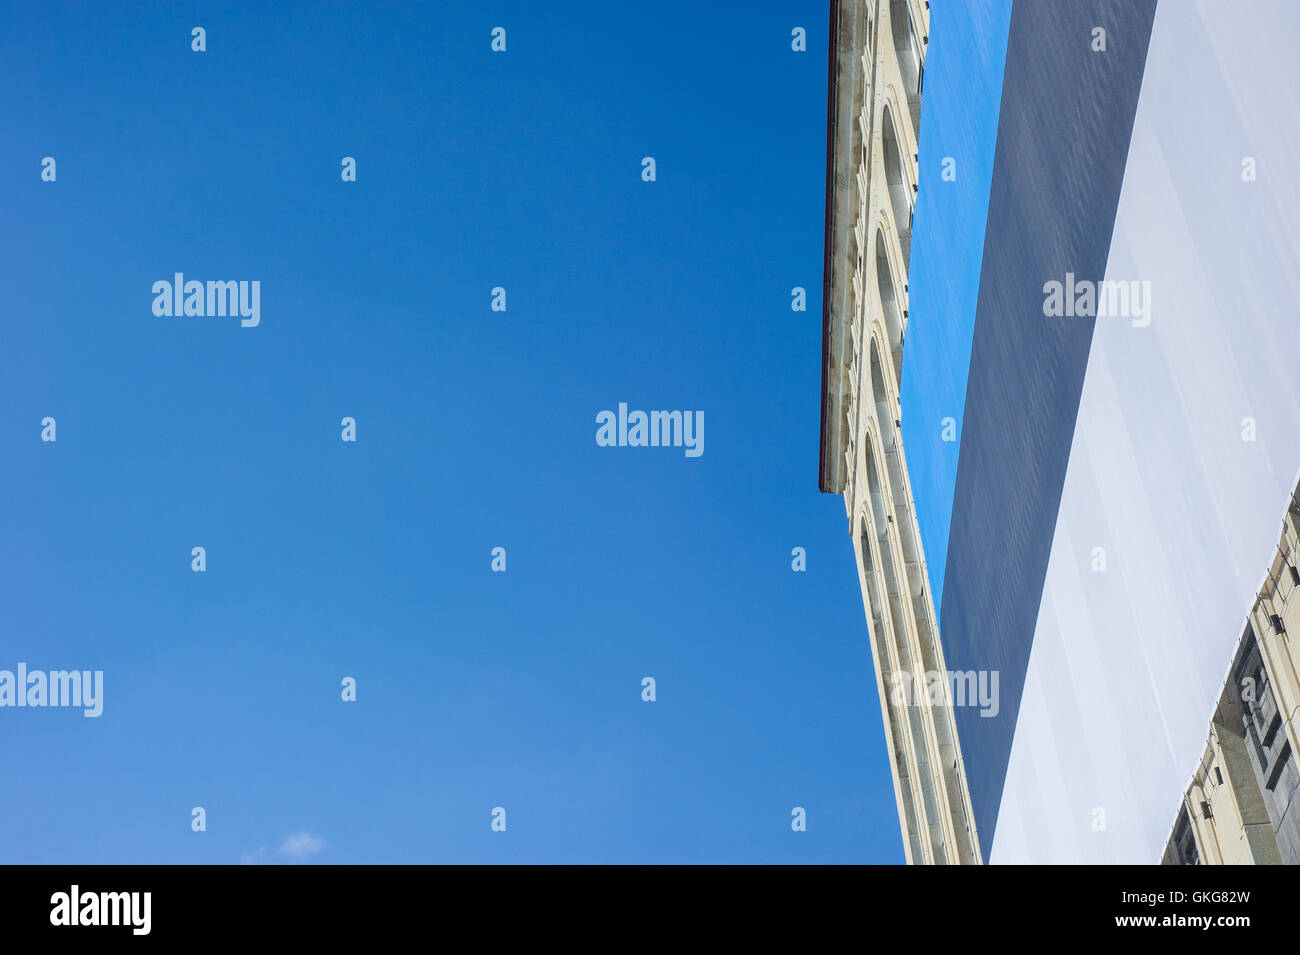 Tallinn, Estonia, 20th August 2016. Estonian flag is seen at the Freedom square of Tallinn. On 20th of August the Republic of Estonia celebrates the 25th years since the restoration of Independence after the collapse of the Soviet Union in 1991. Credit:  Nicolas Bouvy/Alamy Live News Stock Photo